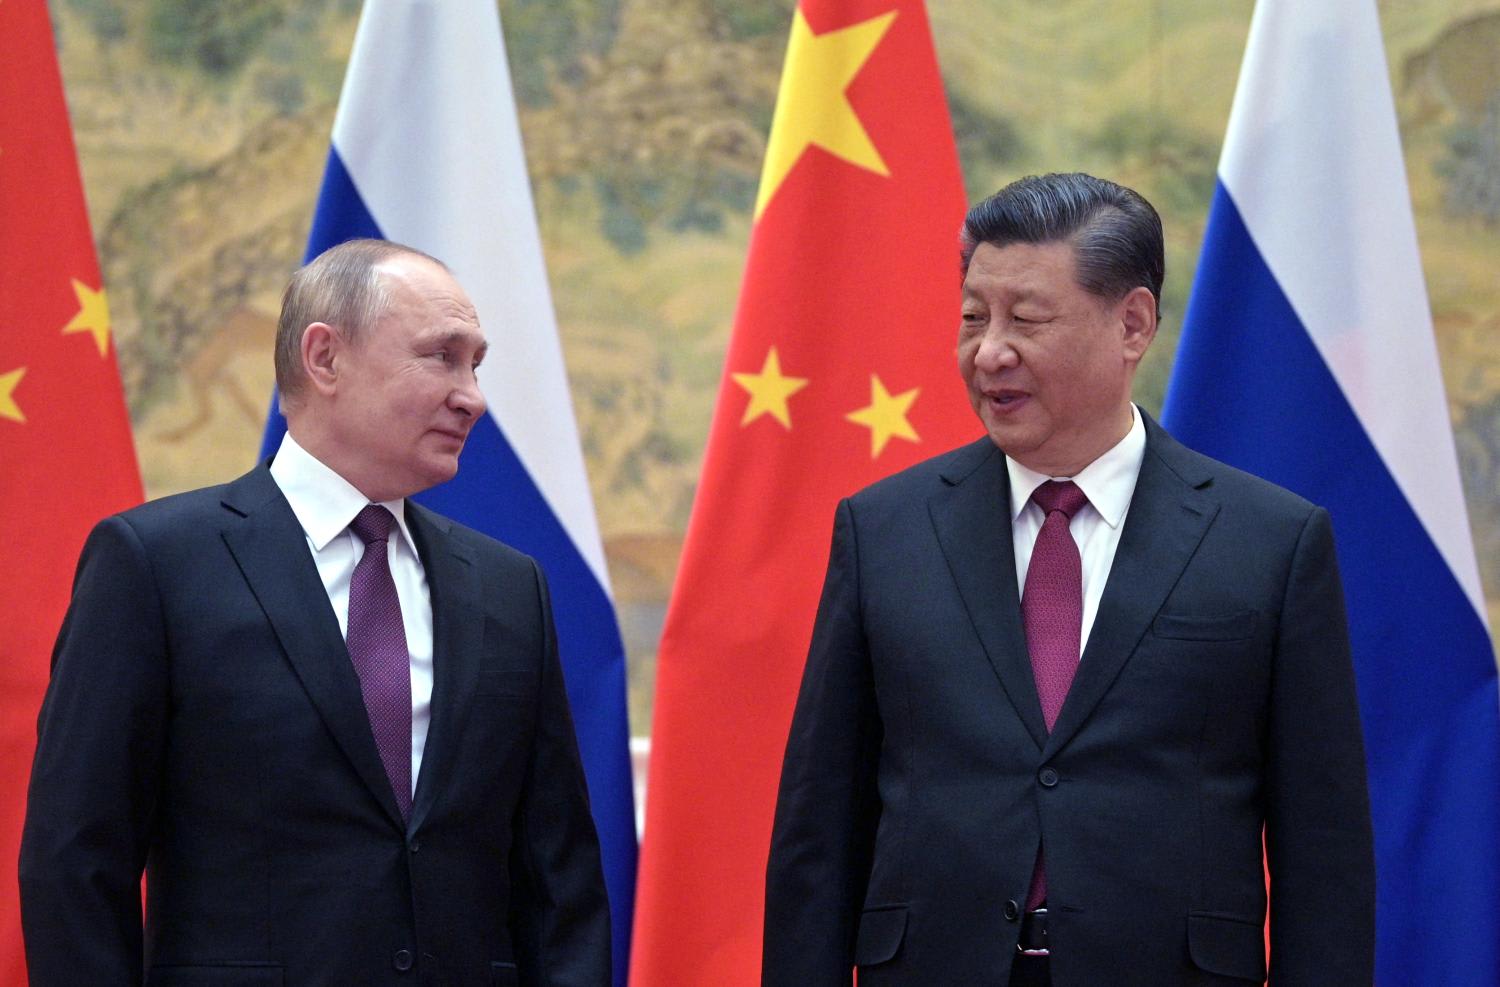 Russian President Vladimir Putin (left) and Chinese President Xi Jinping pose for a photograph during their meeting in Beijing, on Feb 4, 2022.